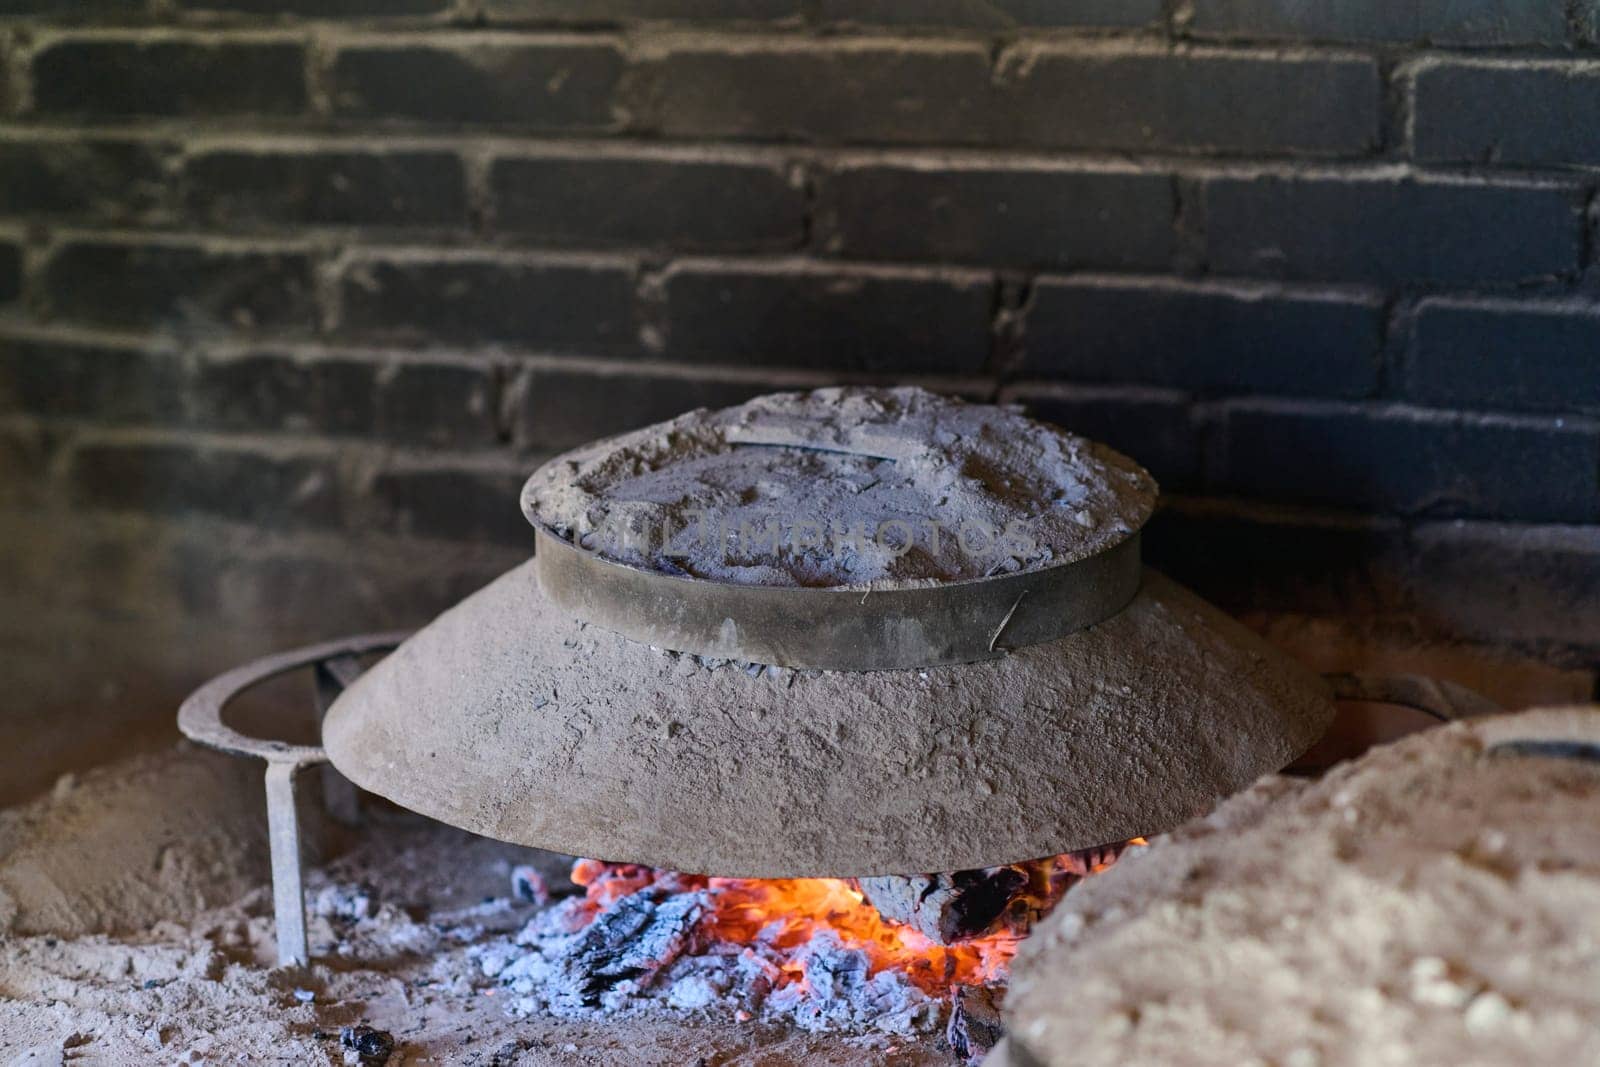 Capturing the essence of Bosnian culinary tradition, step-by-step preparation of a traditional Bosnian pie, showcasing the meticulous craftsmanship and authentic flavors involved in the culinary journey.